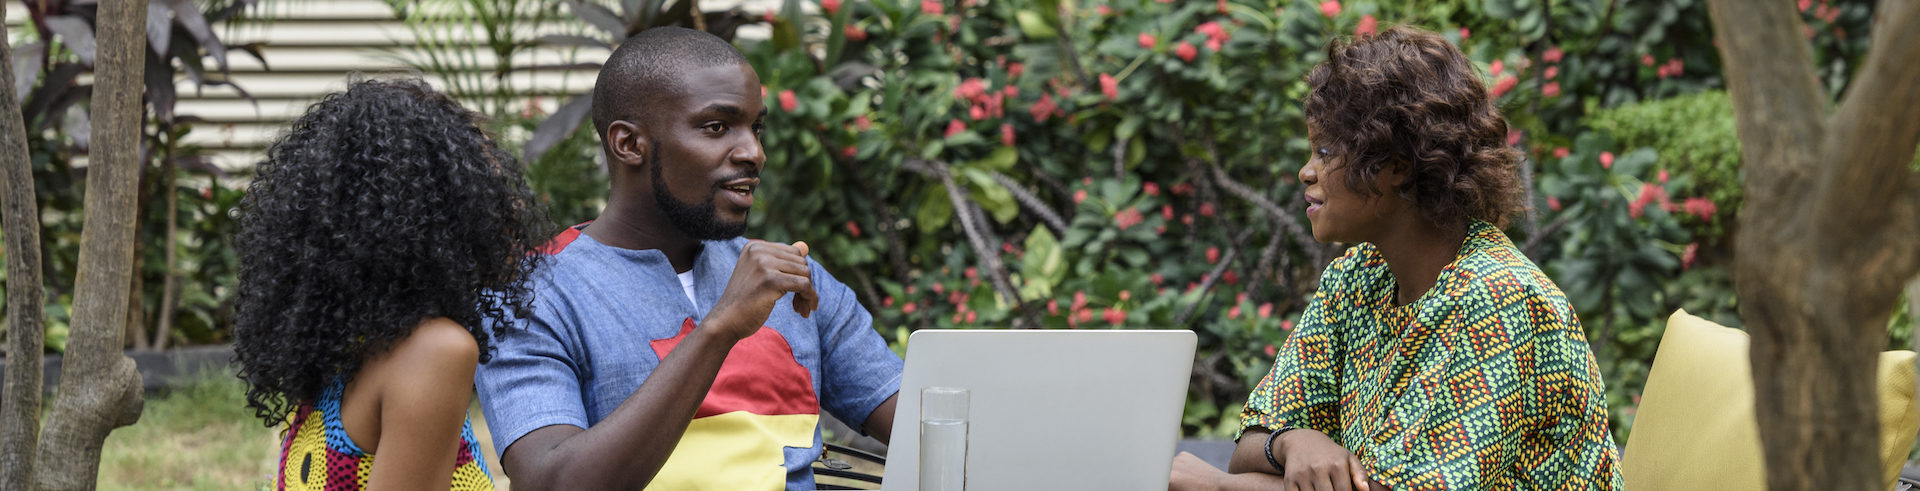 Nigerian colleagues with laptop talking in garden